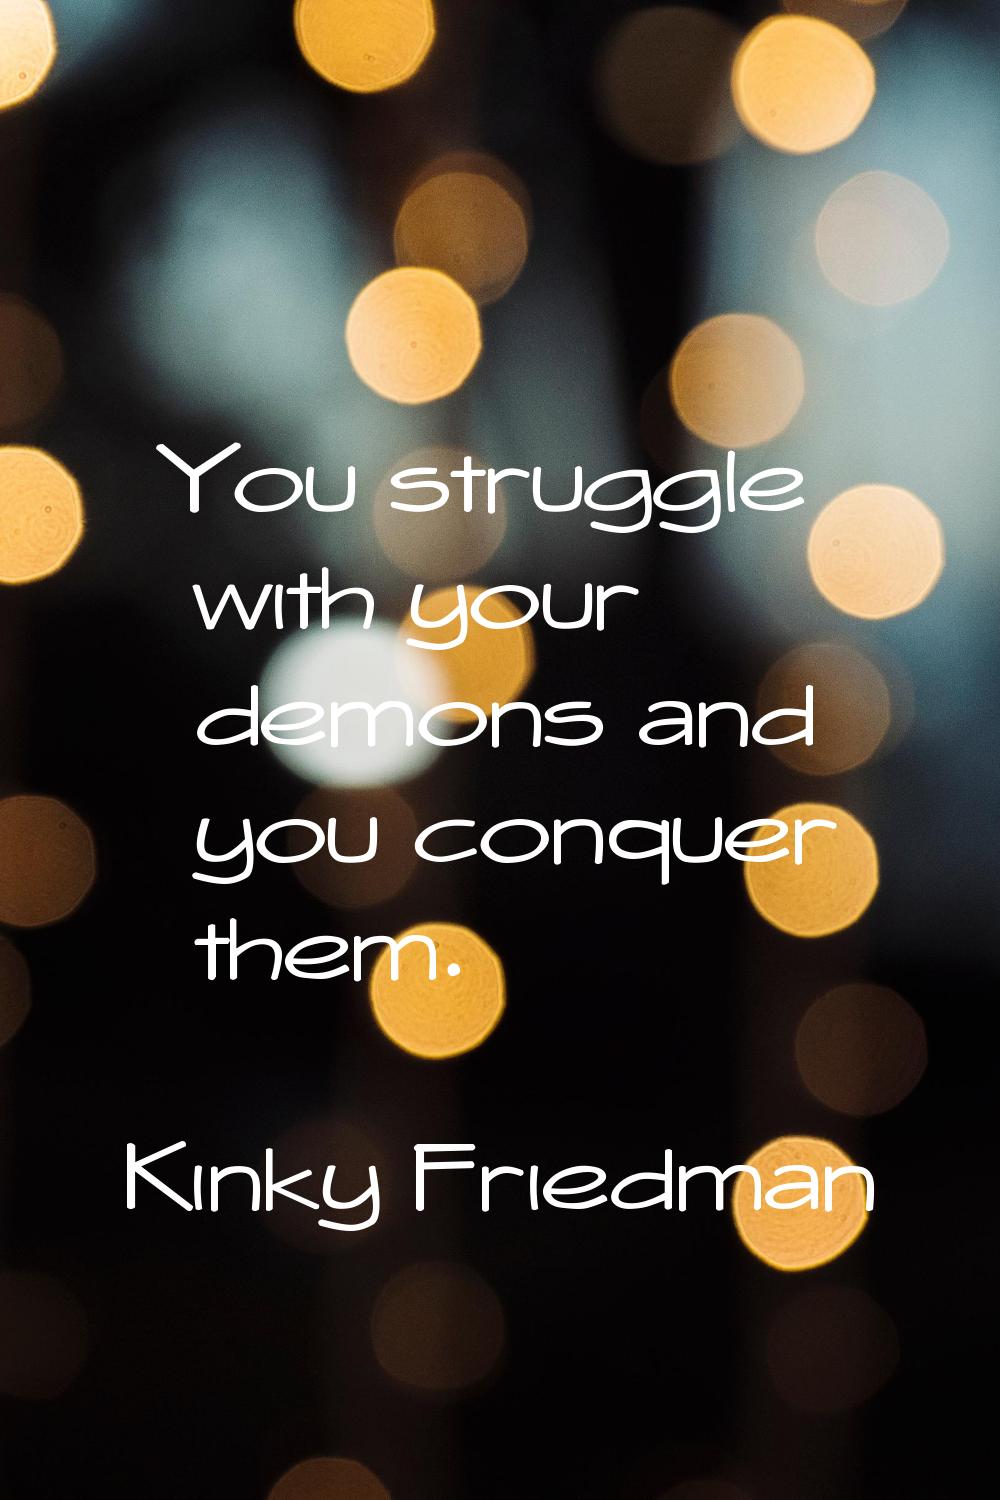 You struggle with your demons and you conquer them.